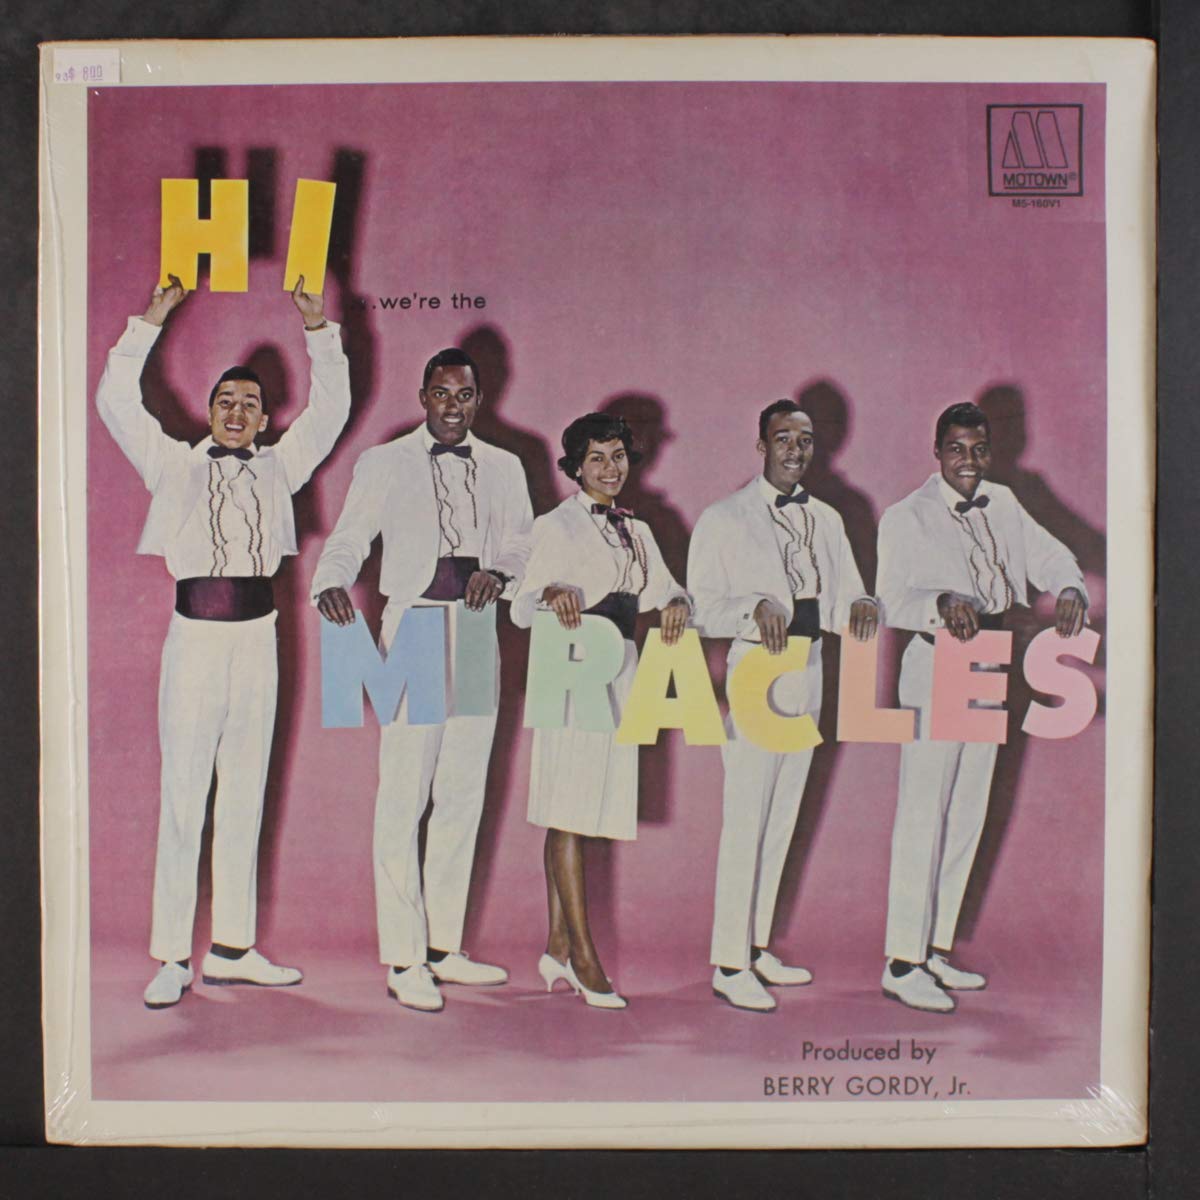 HI WE'RE THE MIRACLES